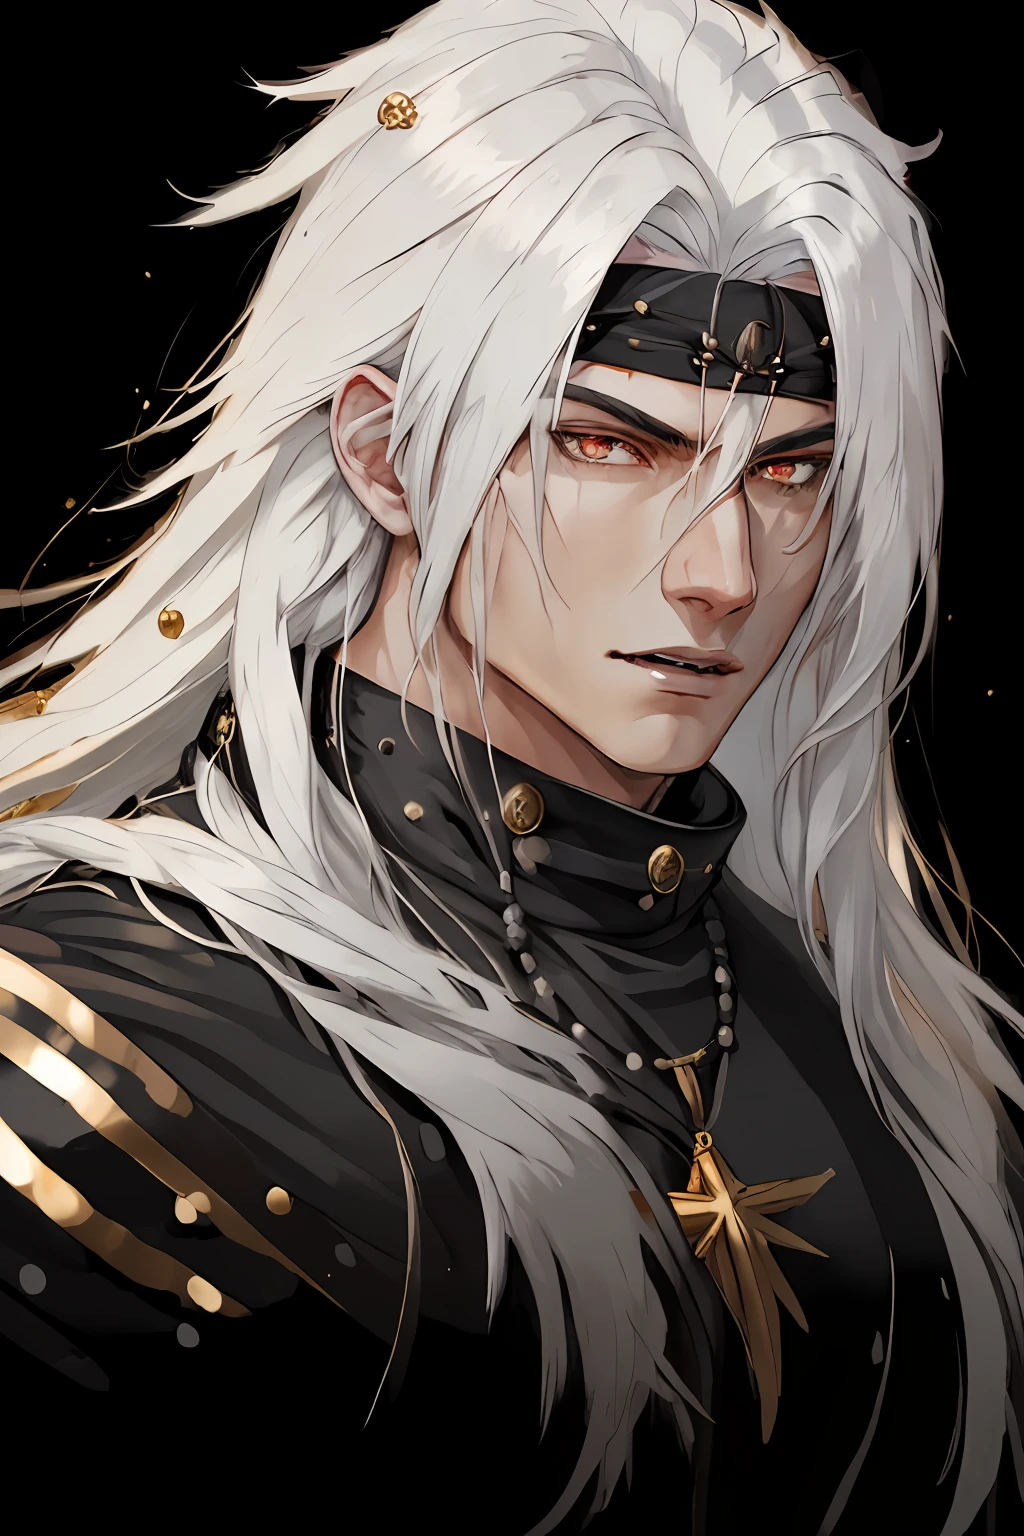 "Best quality, masterpiece, 1 boy with long white hair, white eyes, wearing a black beaded necklace, smug face, fangs, shirtless showing his muscles, adorned with a gold gauntlet, set against a portrait-style composition with an abstract background."